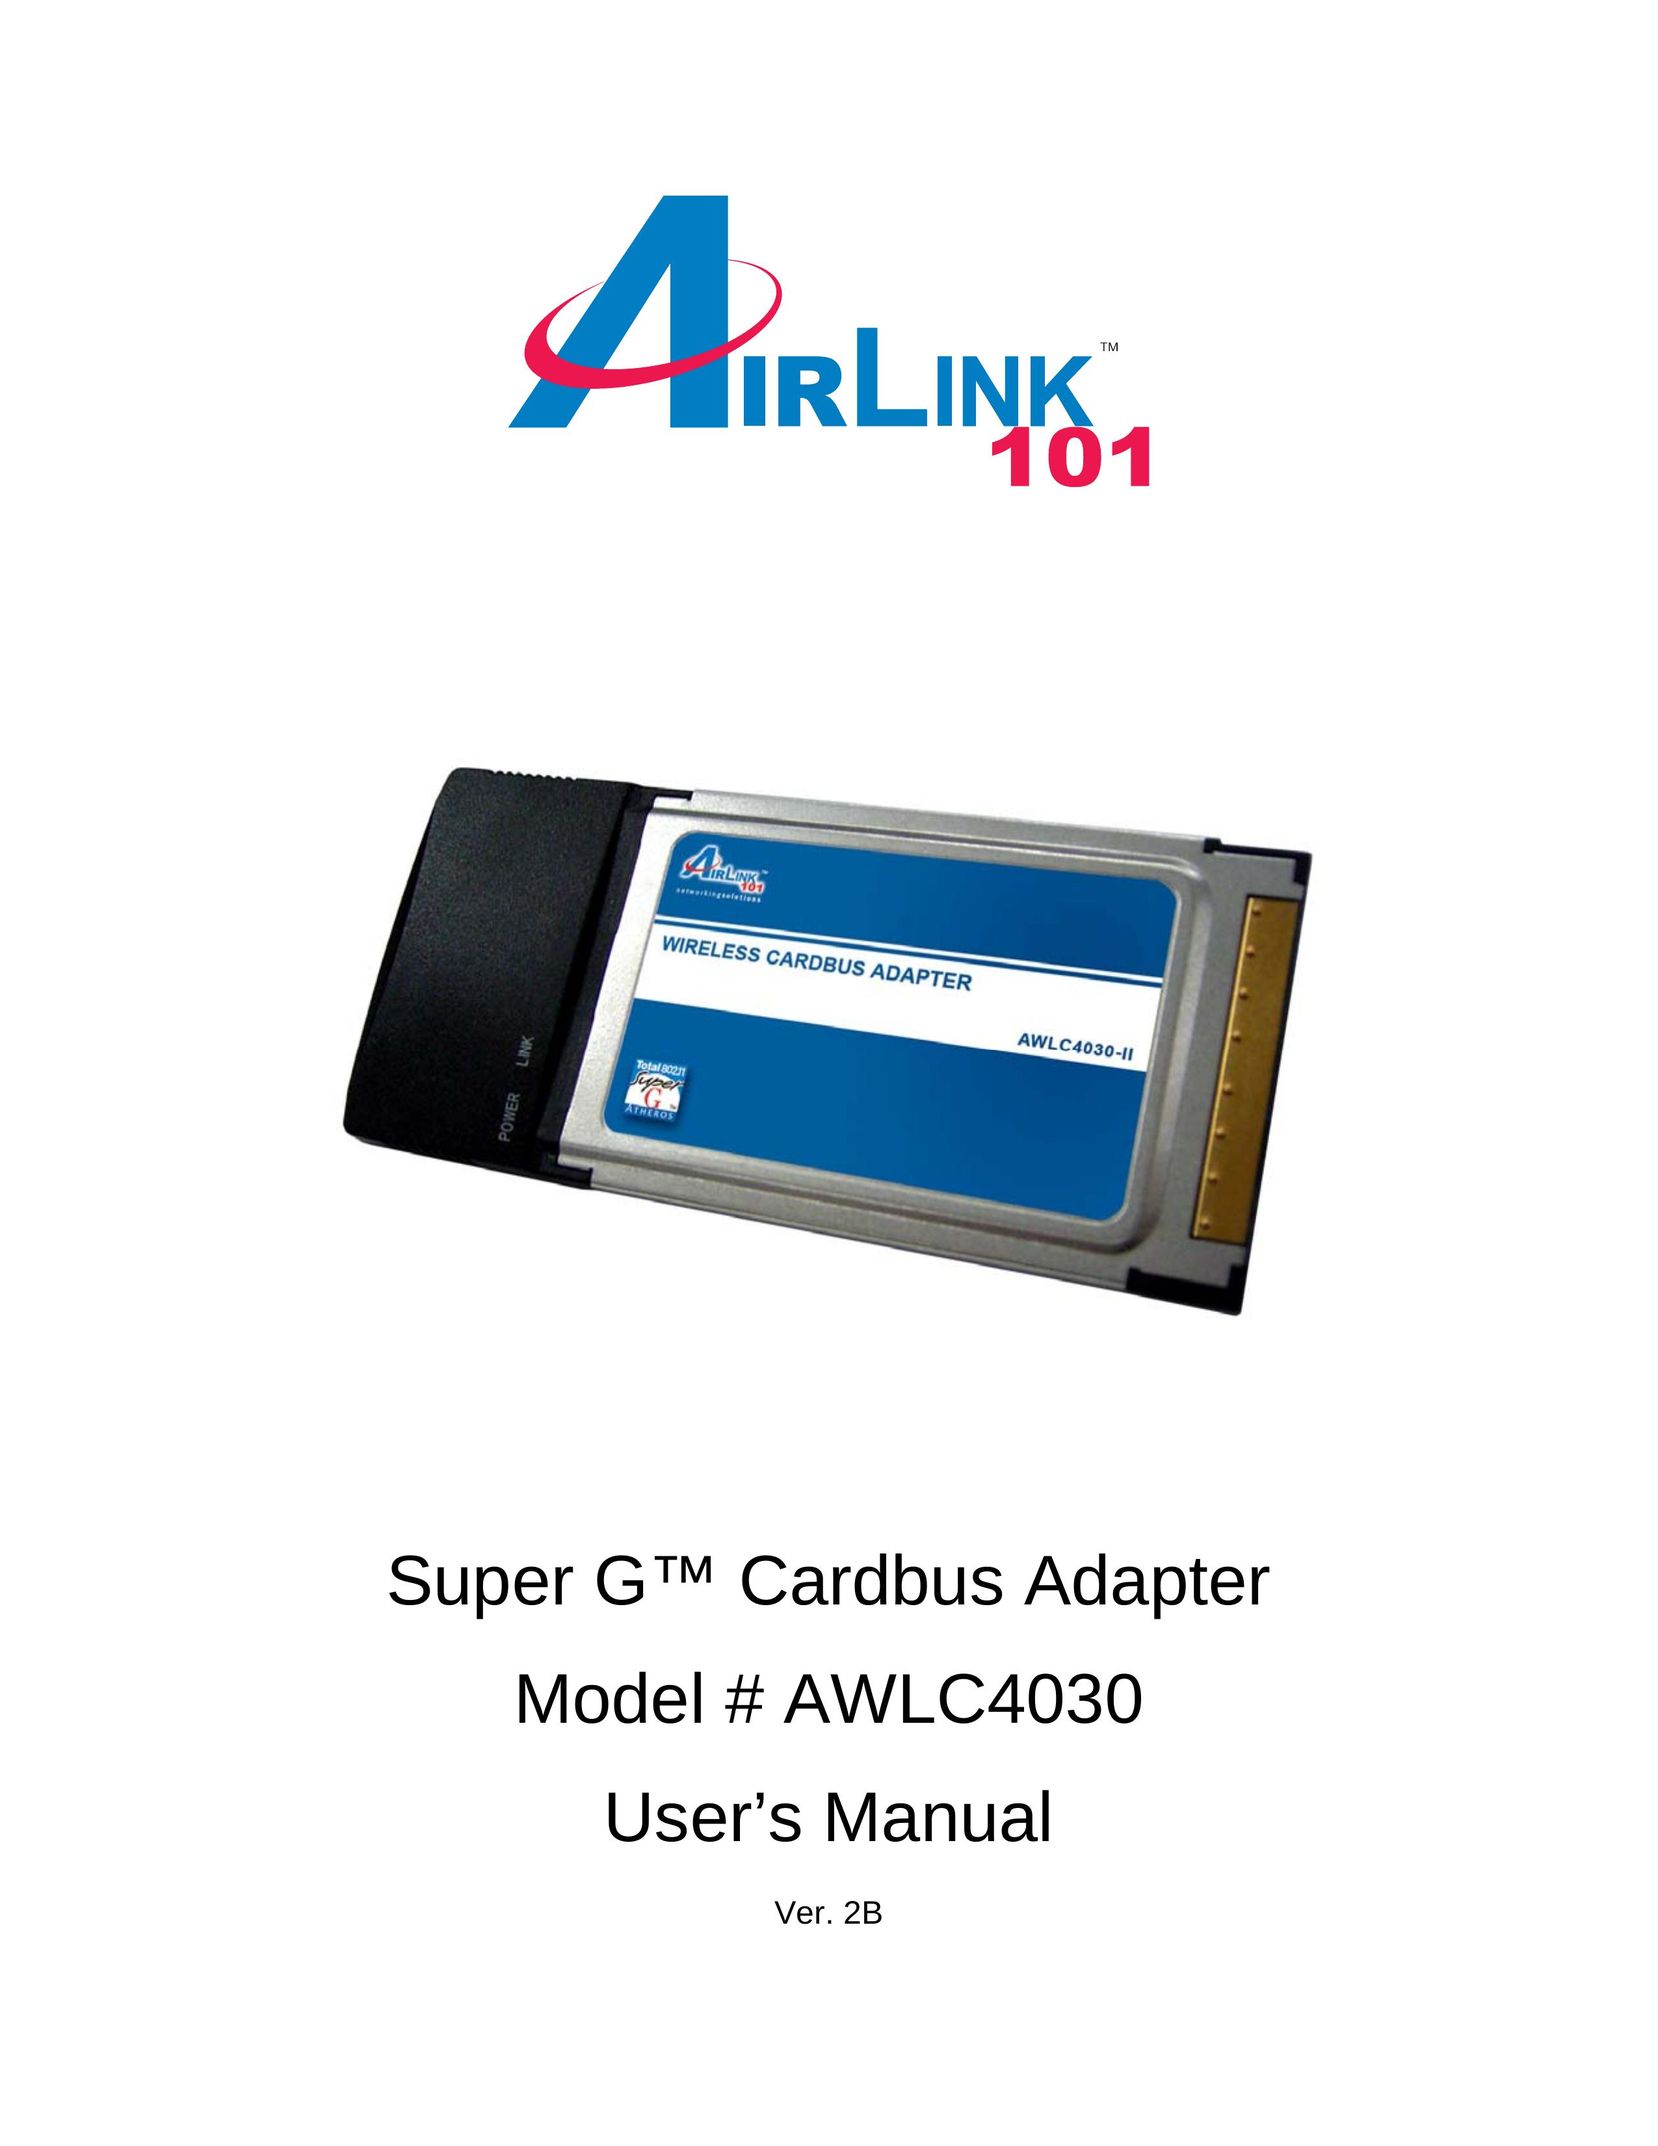 Airlink101 AWLC4030 Network Card User Manual